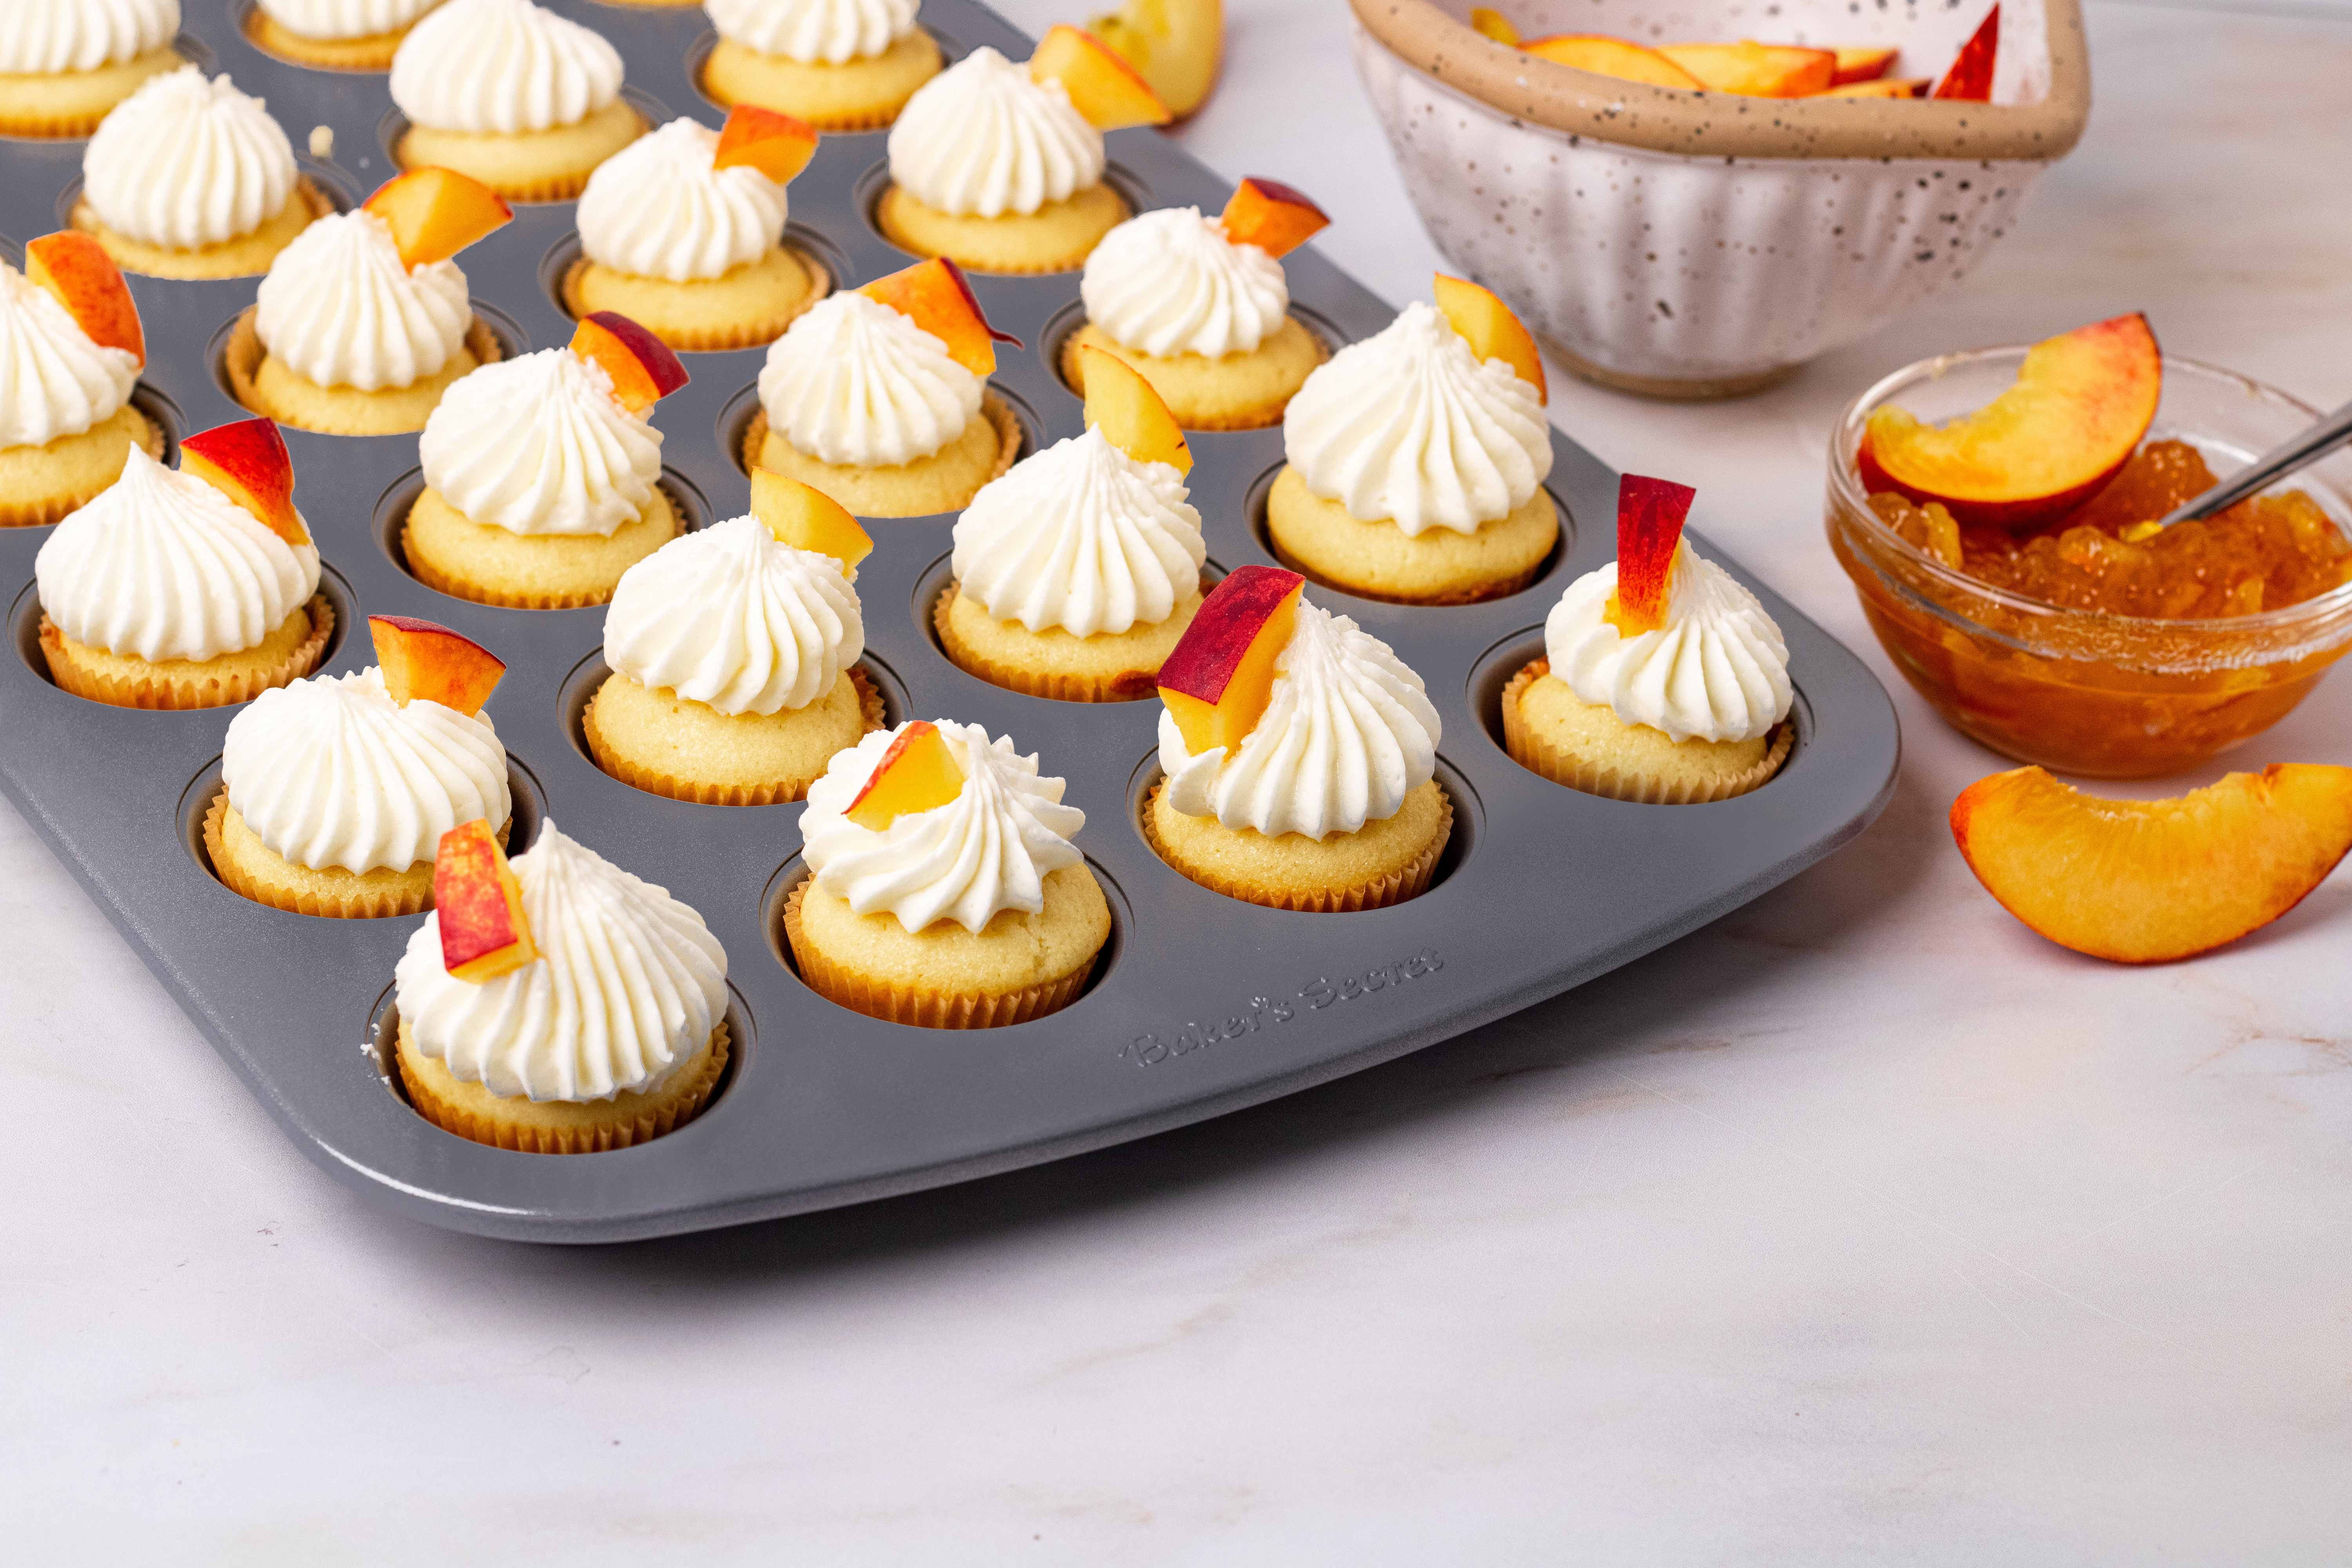 BakeEasy Mini Cupcake Pan Non Stick Carbon Steel Tray 12/24/48 Cups For  Muffins, Cupcakes, Tarts Perfect For 823 And More. From Cosmose, $12.56